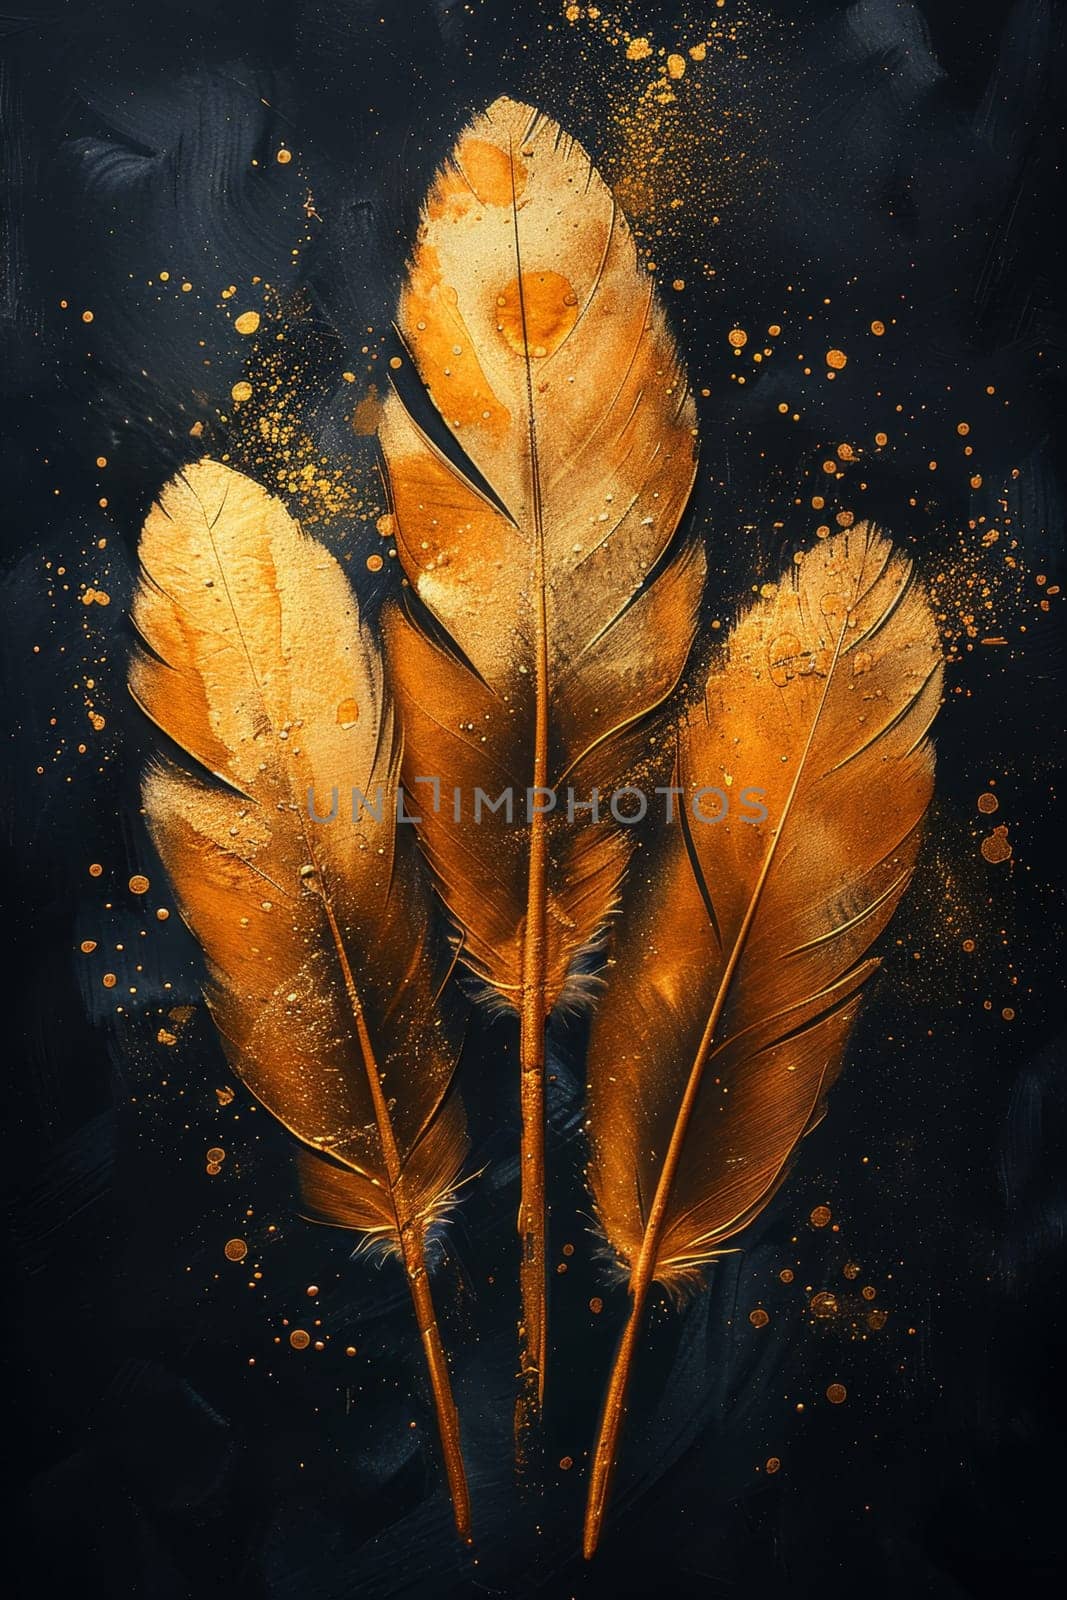 Golden feathers highlighted on a black background.